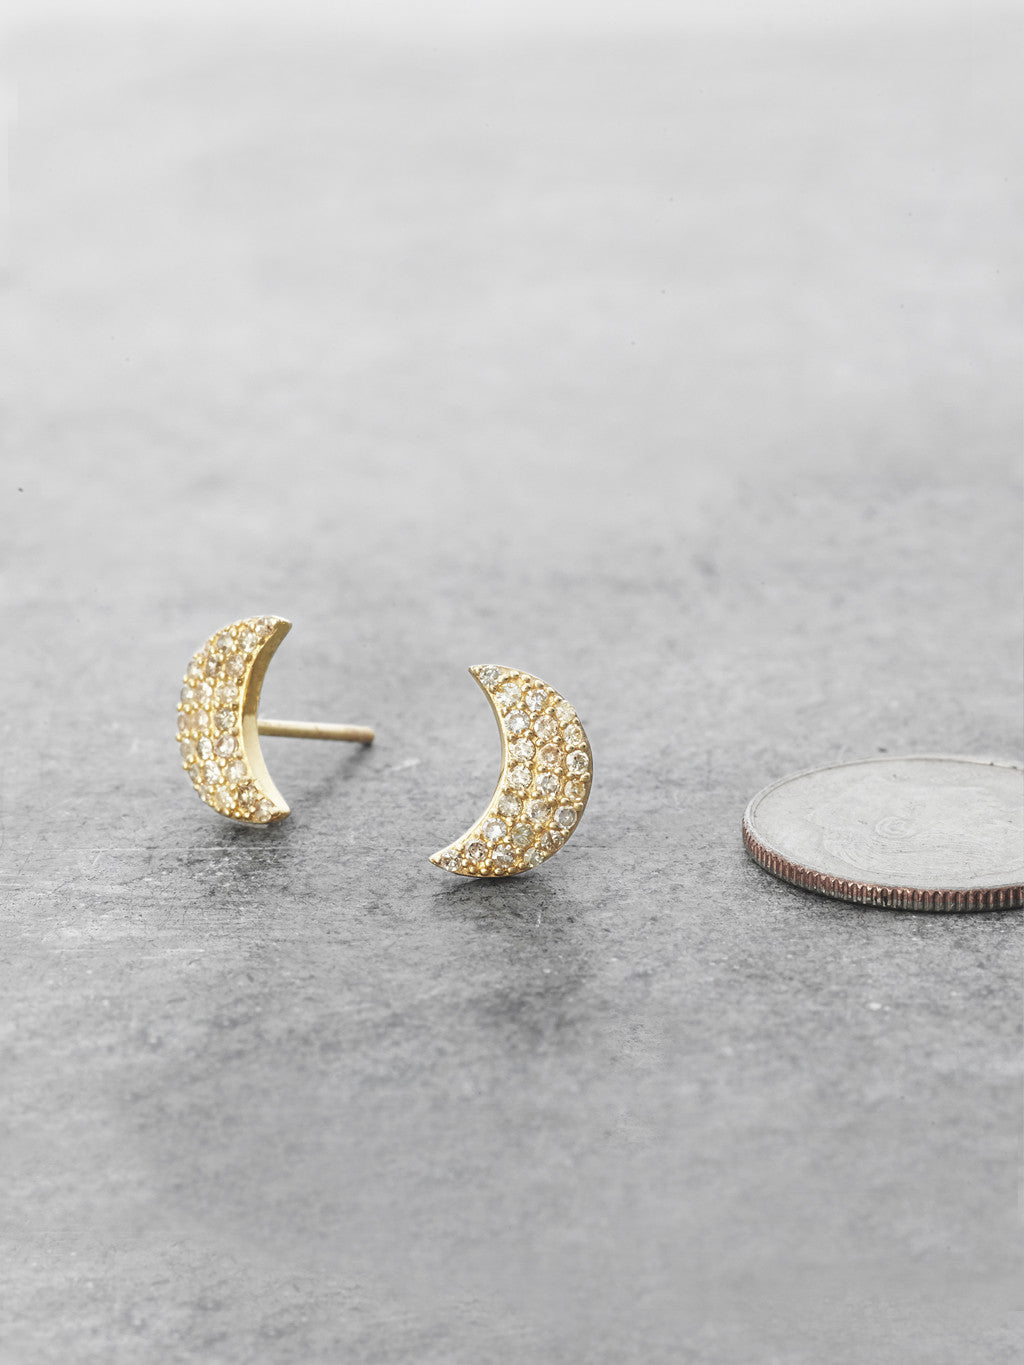 14K Pave Diamond Crescent Moon Posts to scale